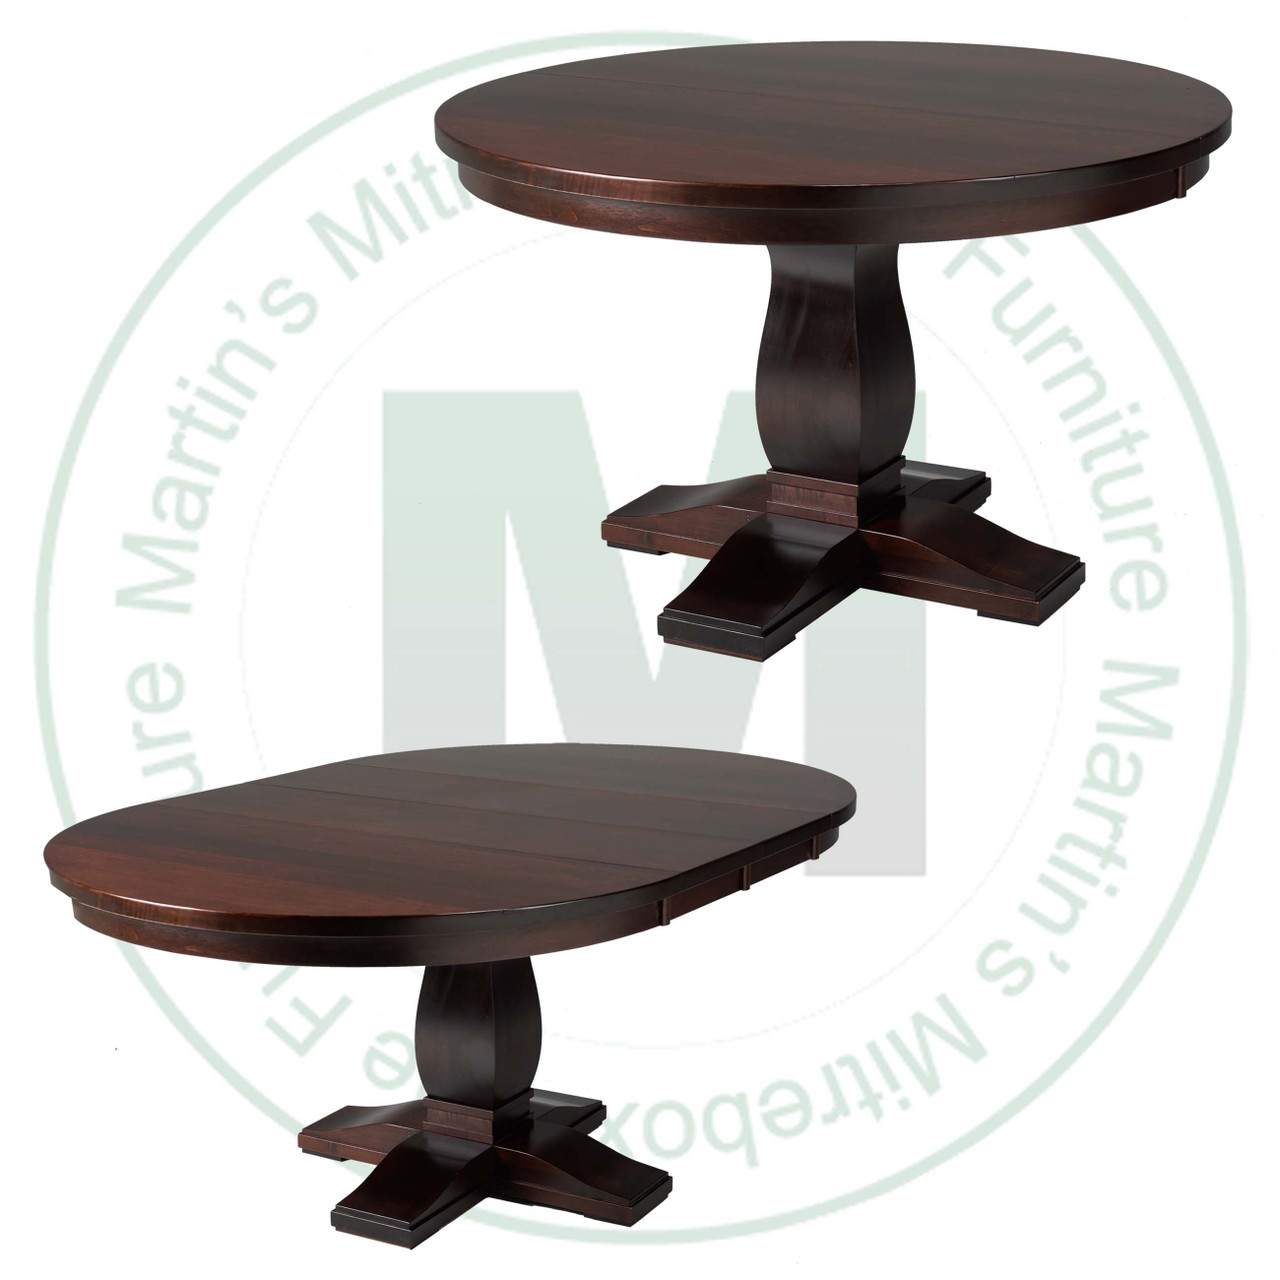 Oak Valencia Single Pedestal Table 36''D x 42''W x 30''H With 1 - 12'' Leaf Table. Table Has 1'' Thick Top.